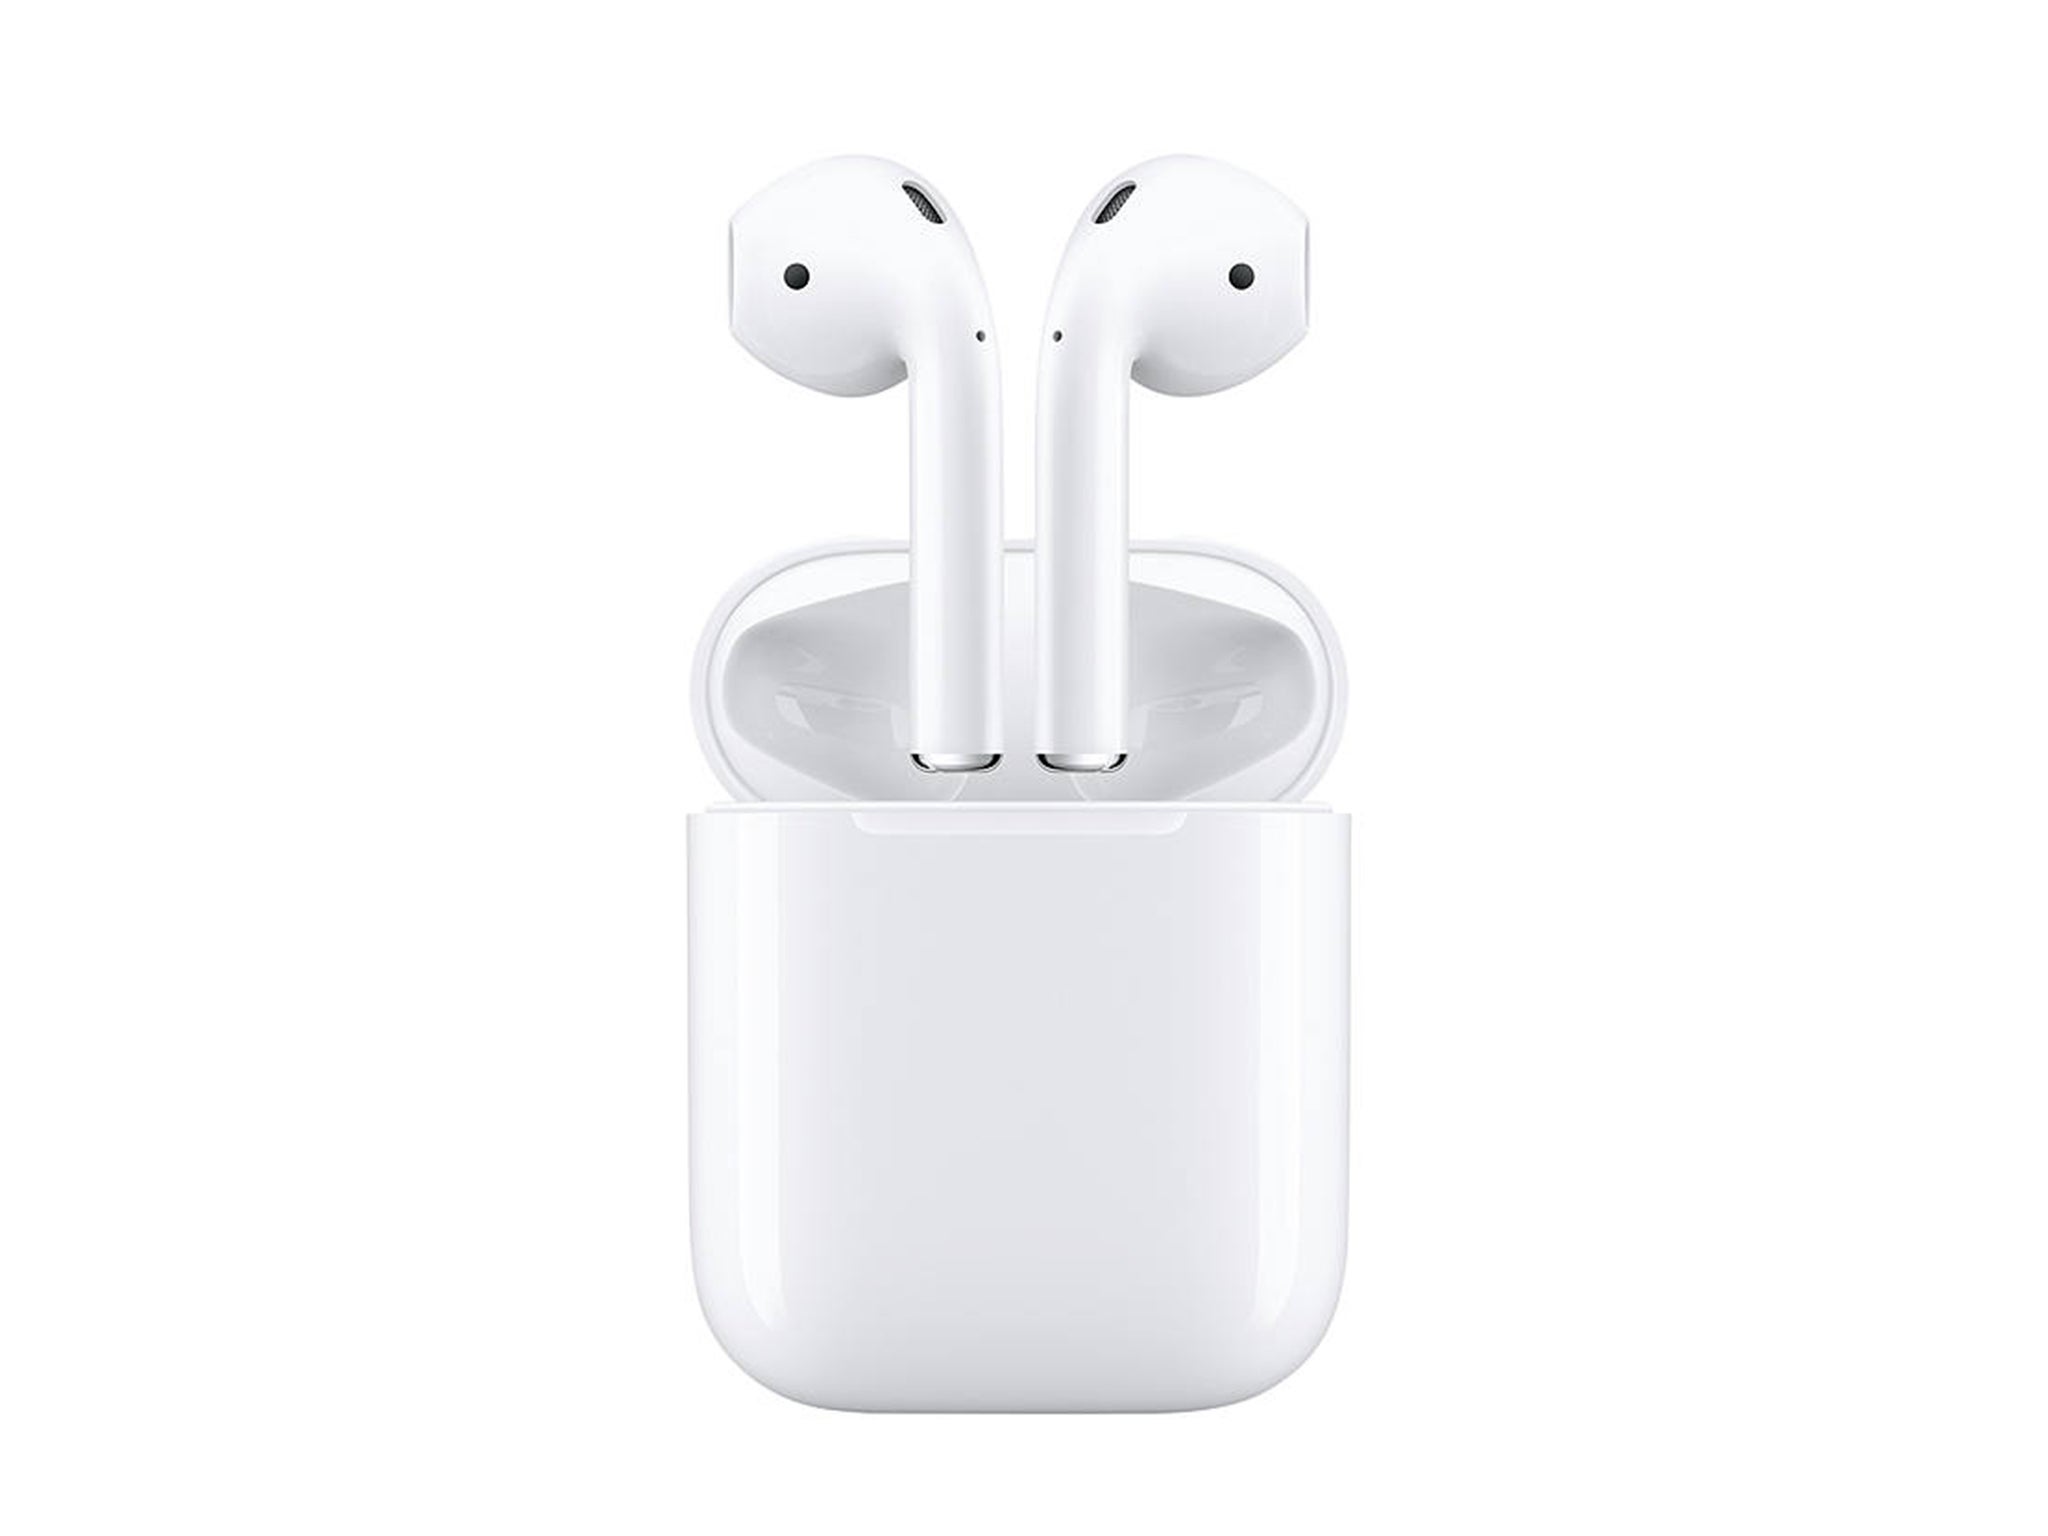 Apple airpods беспроводные купить. Наушники беспроводные Hoco ew02. Наушники беспроводные Apple AIRPODS 2. Наушники TWS Apple AIRPODS 2 белый. Наушники Apple AIRPODS 2 with Charging Case.